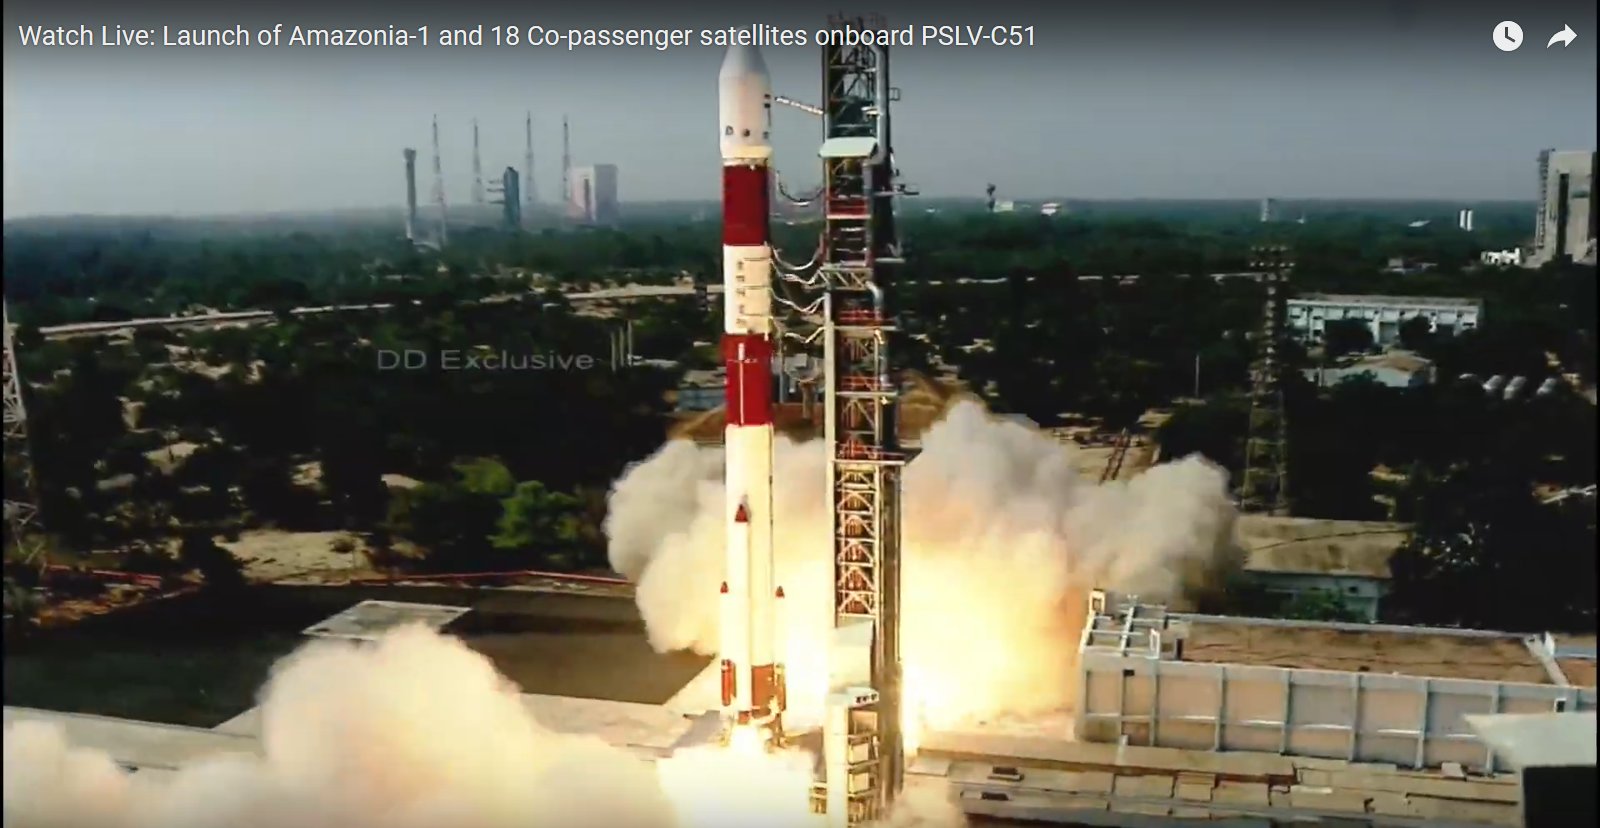 ISRO launches PSLV-C51 carrying Brazil’s Amazonia-1 and 18 other satellites